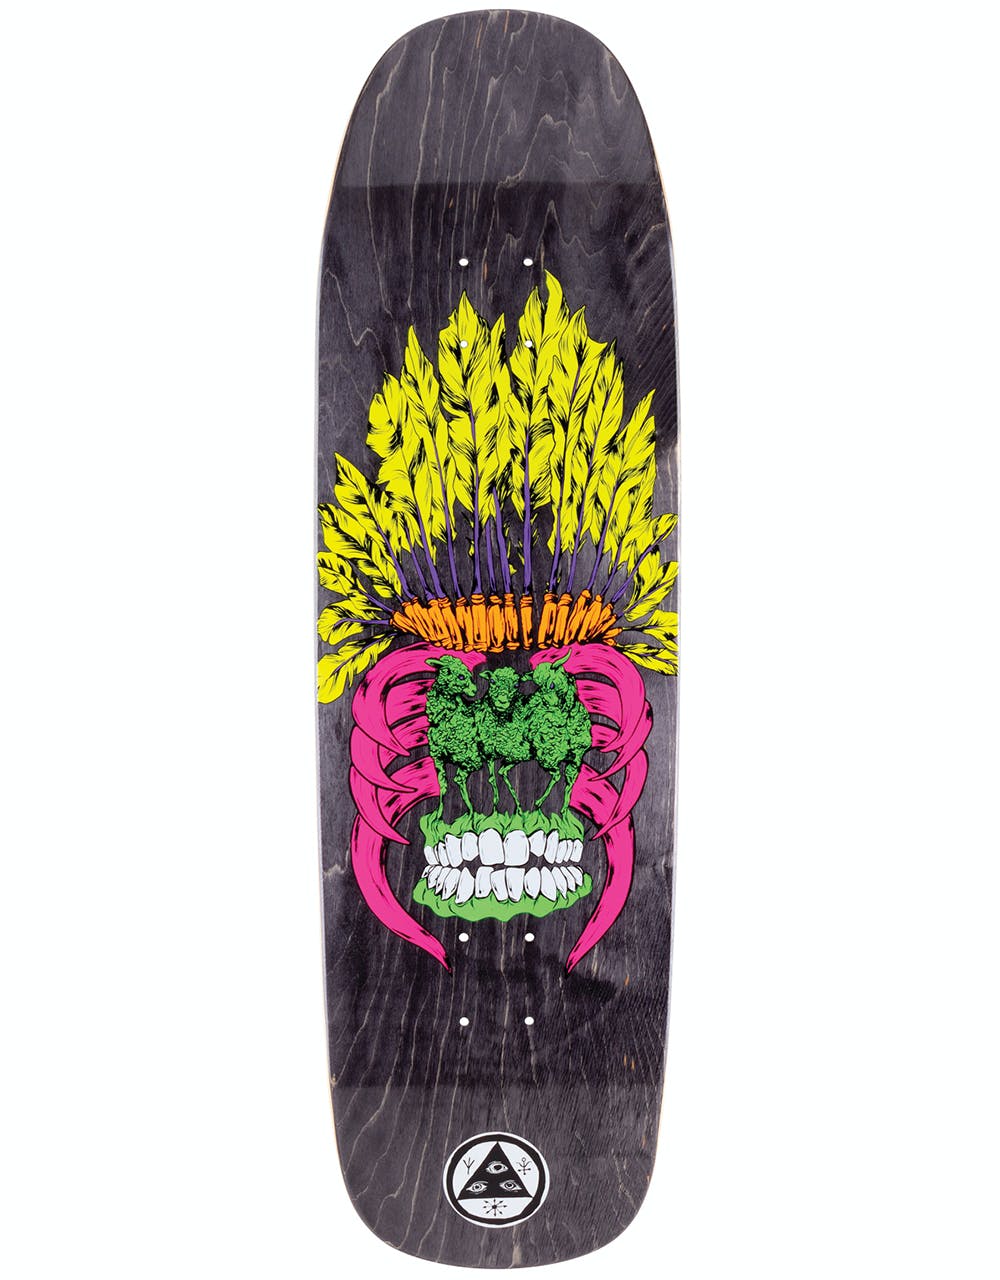 Welcome Sheep of a Feather on Golem Skateboard Deck - 9.25"